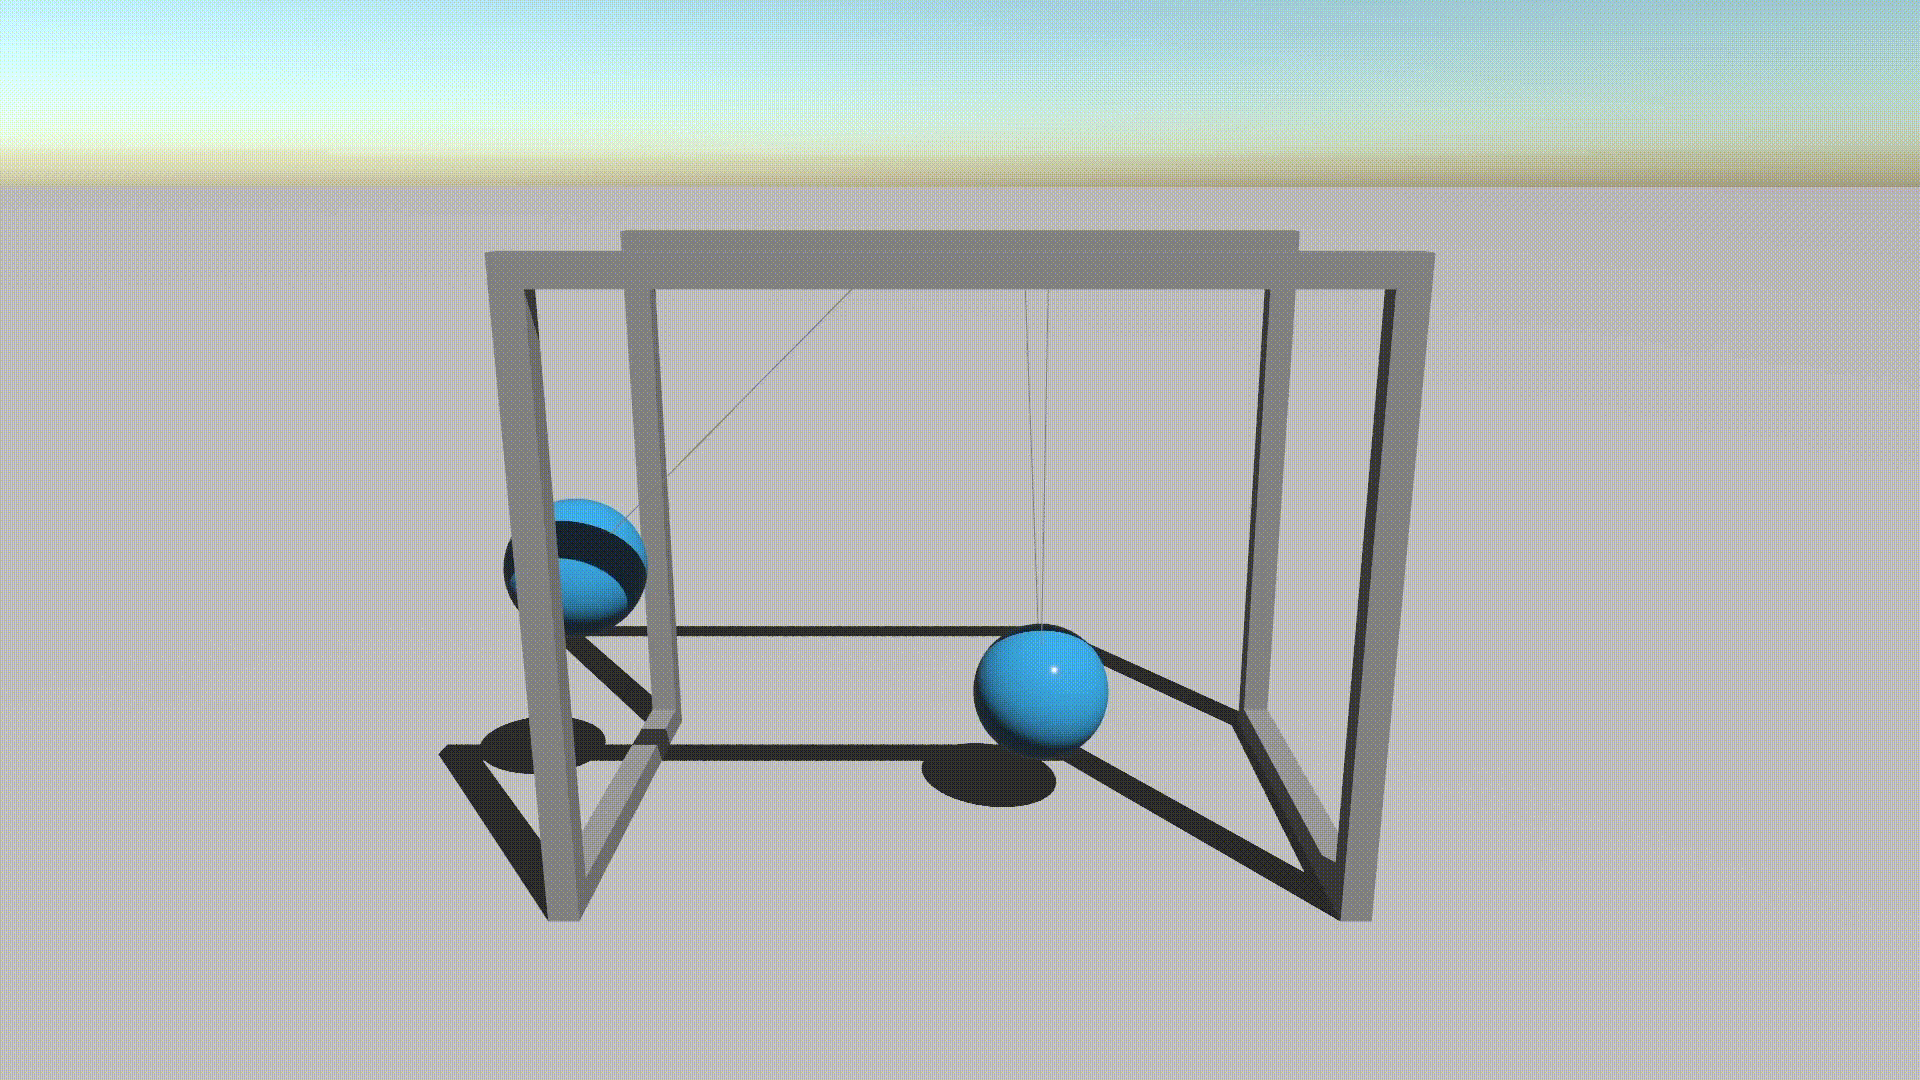 Balls held by string swinging and hitting each other in a Newton's cradle